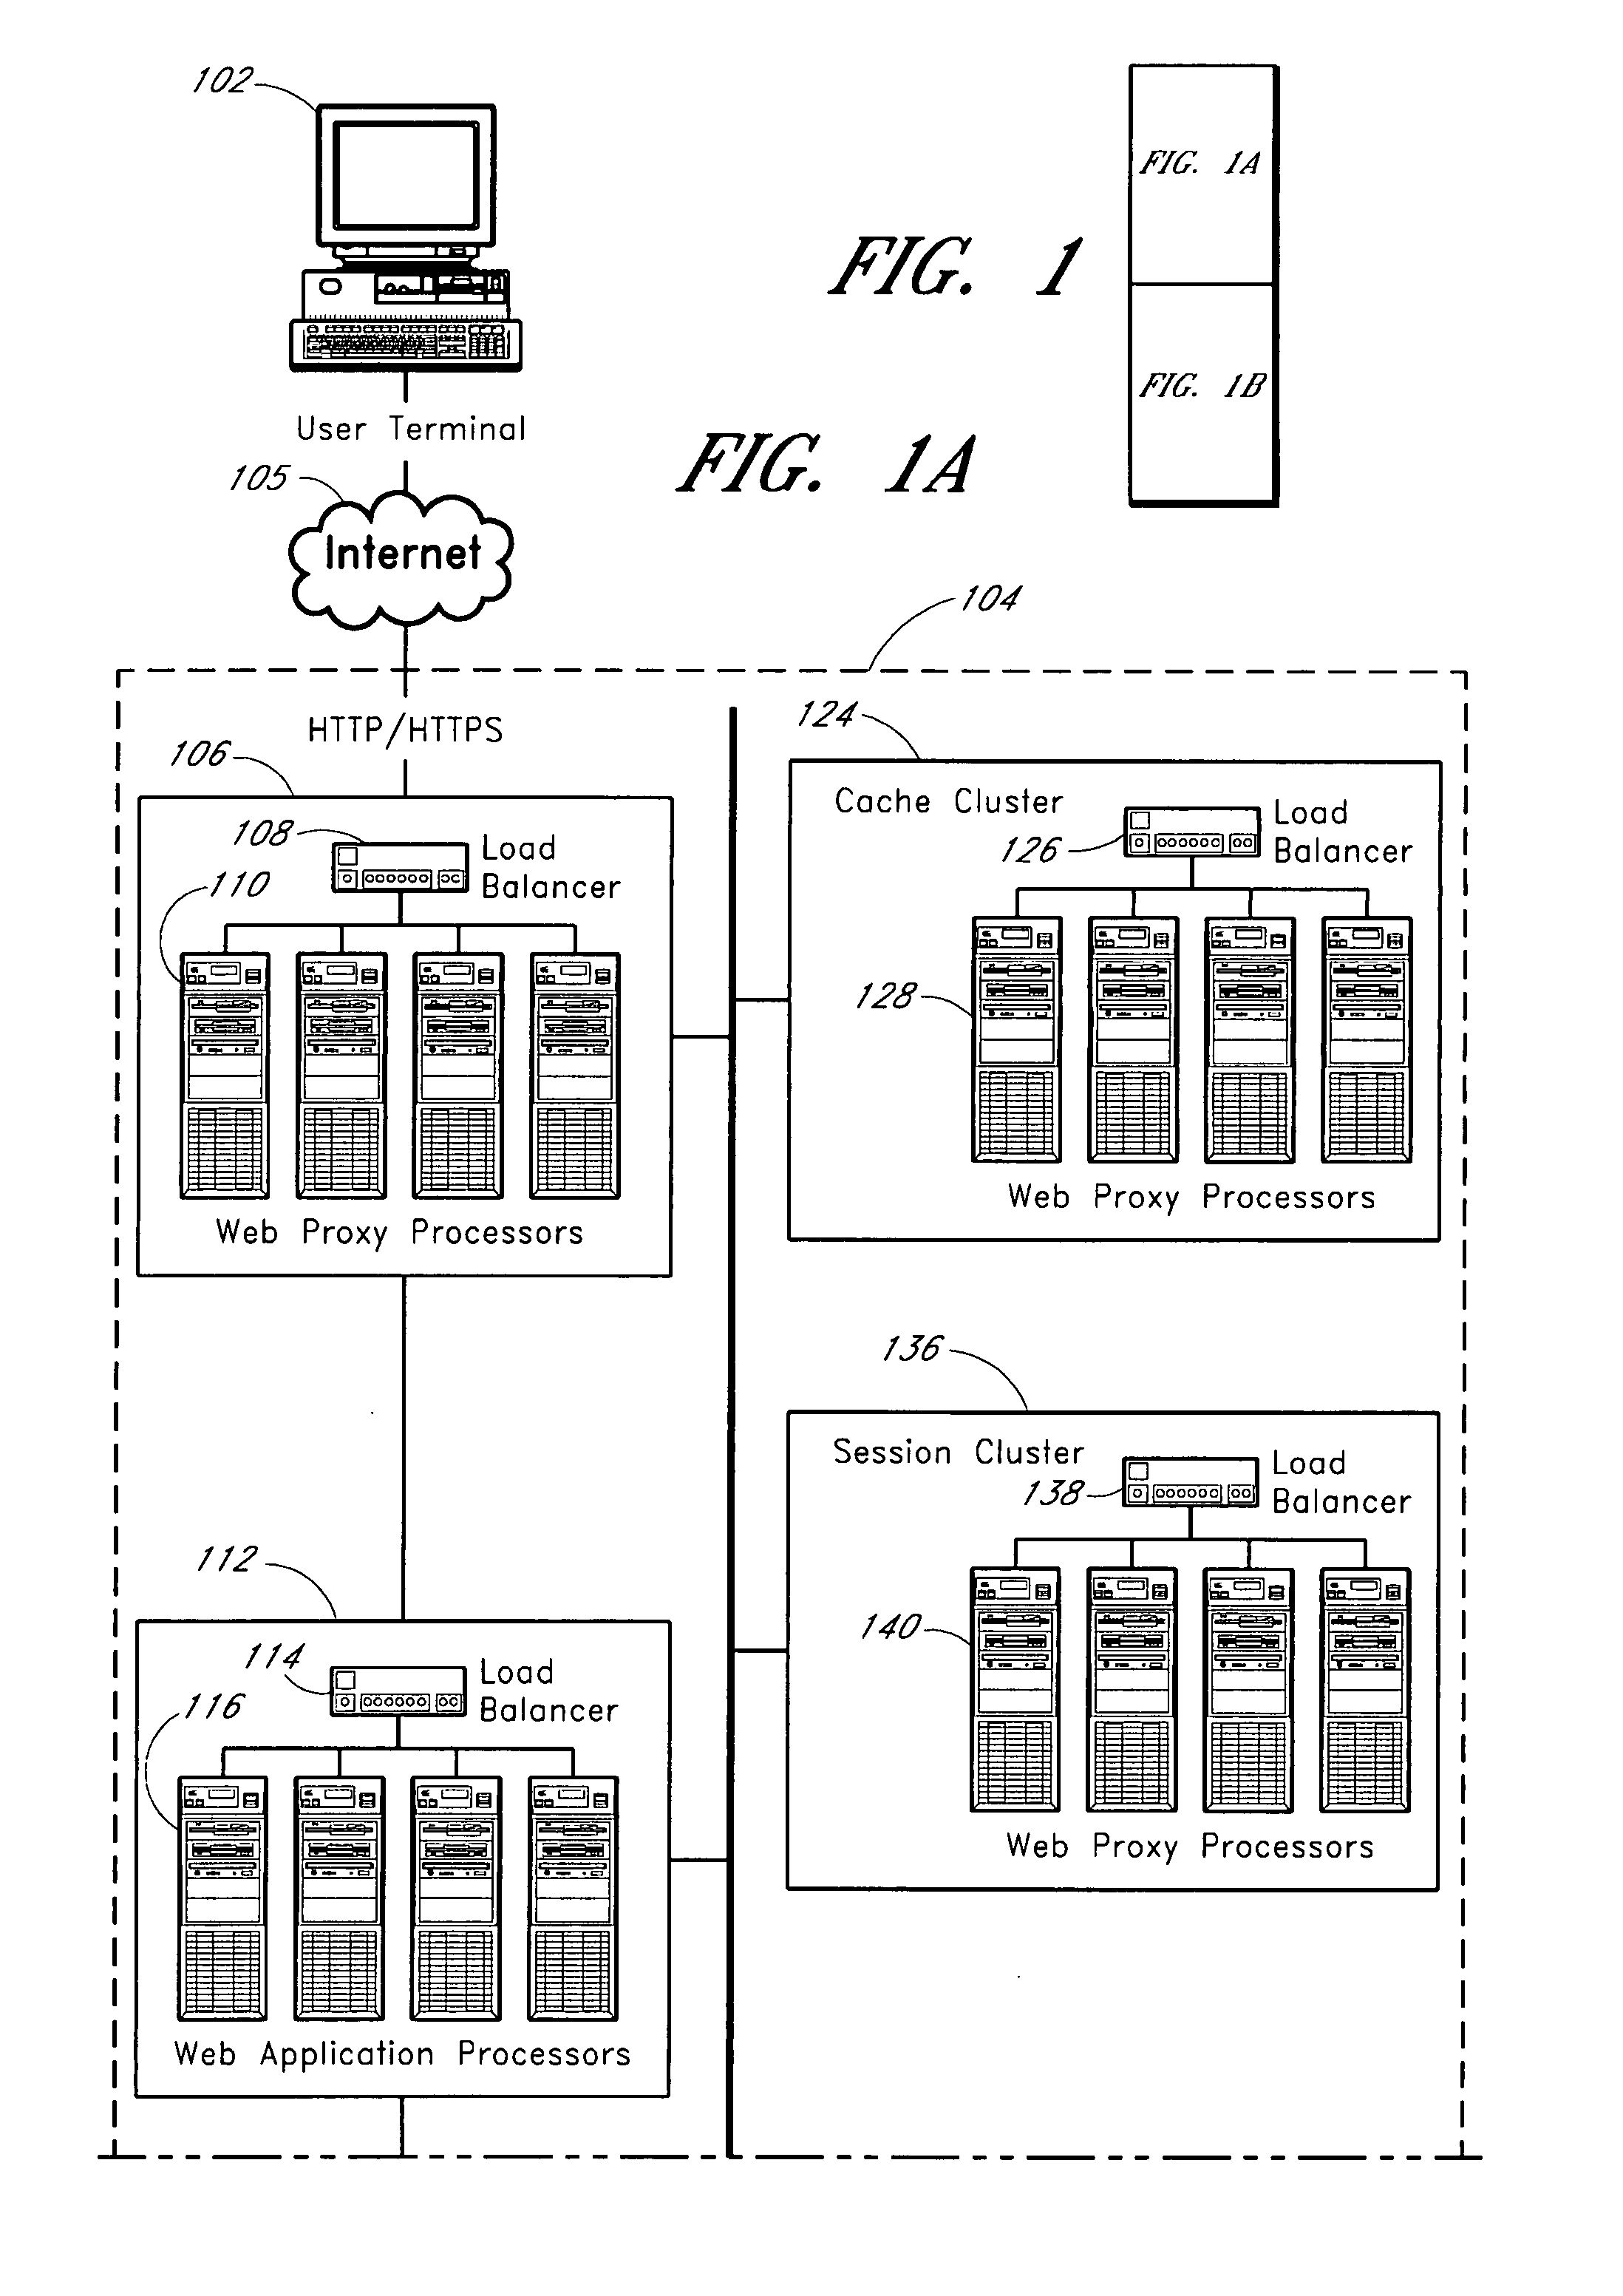 Methods and systems for reducing burst usage of a networked computer system